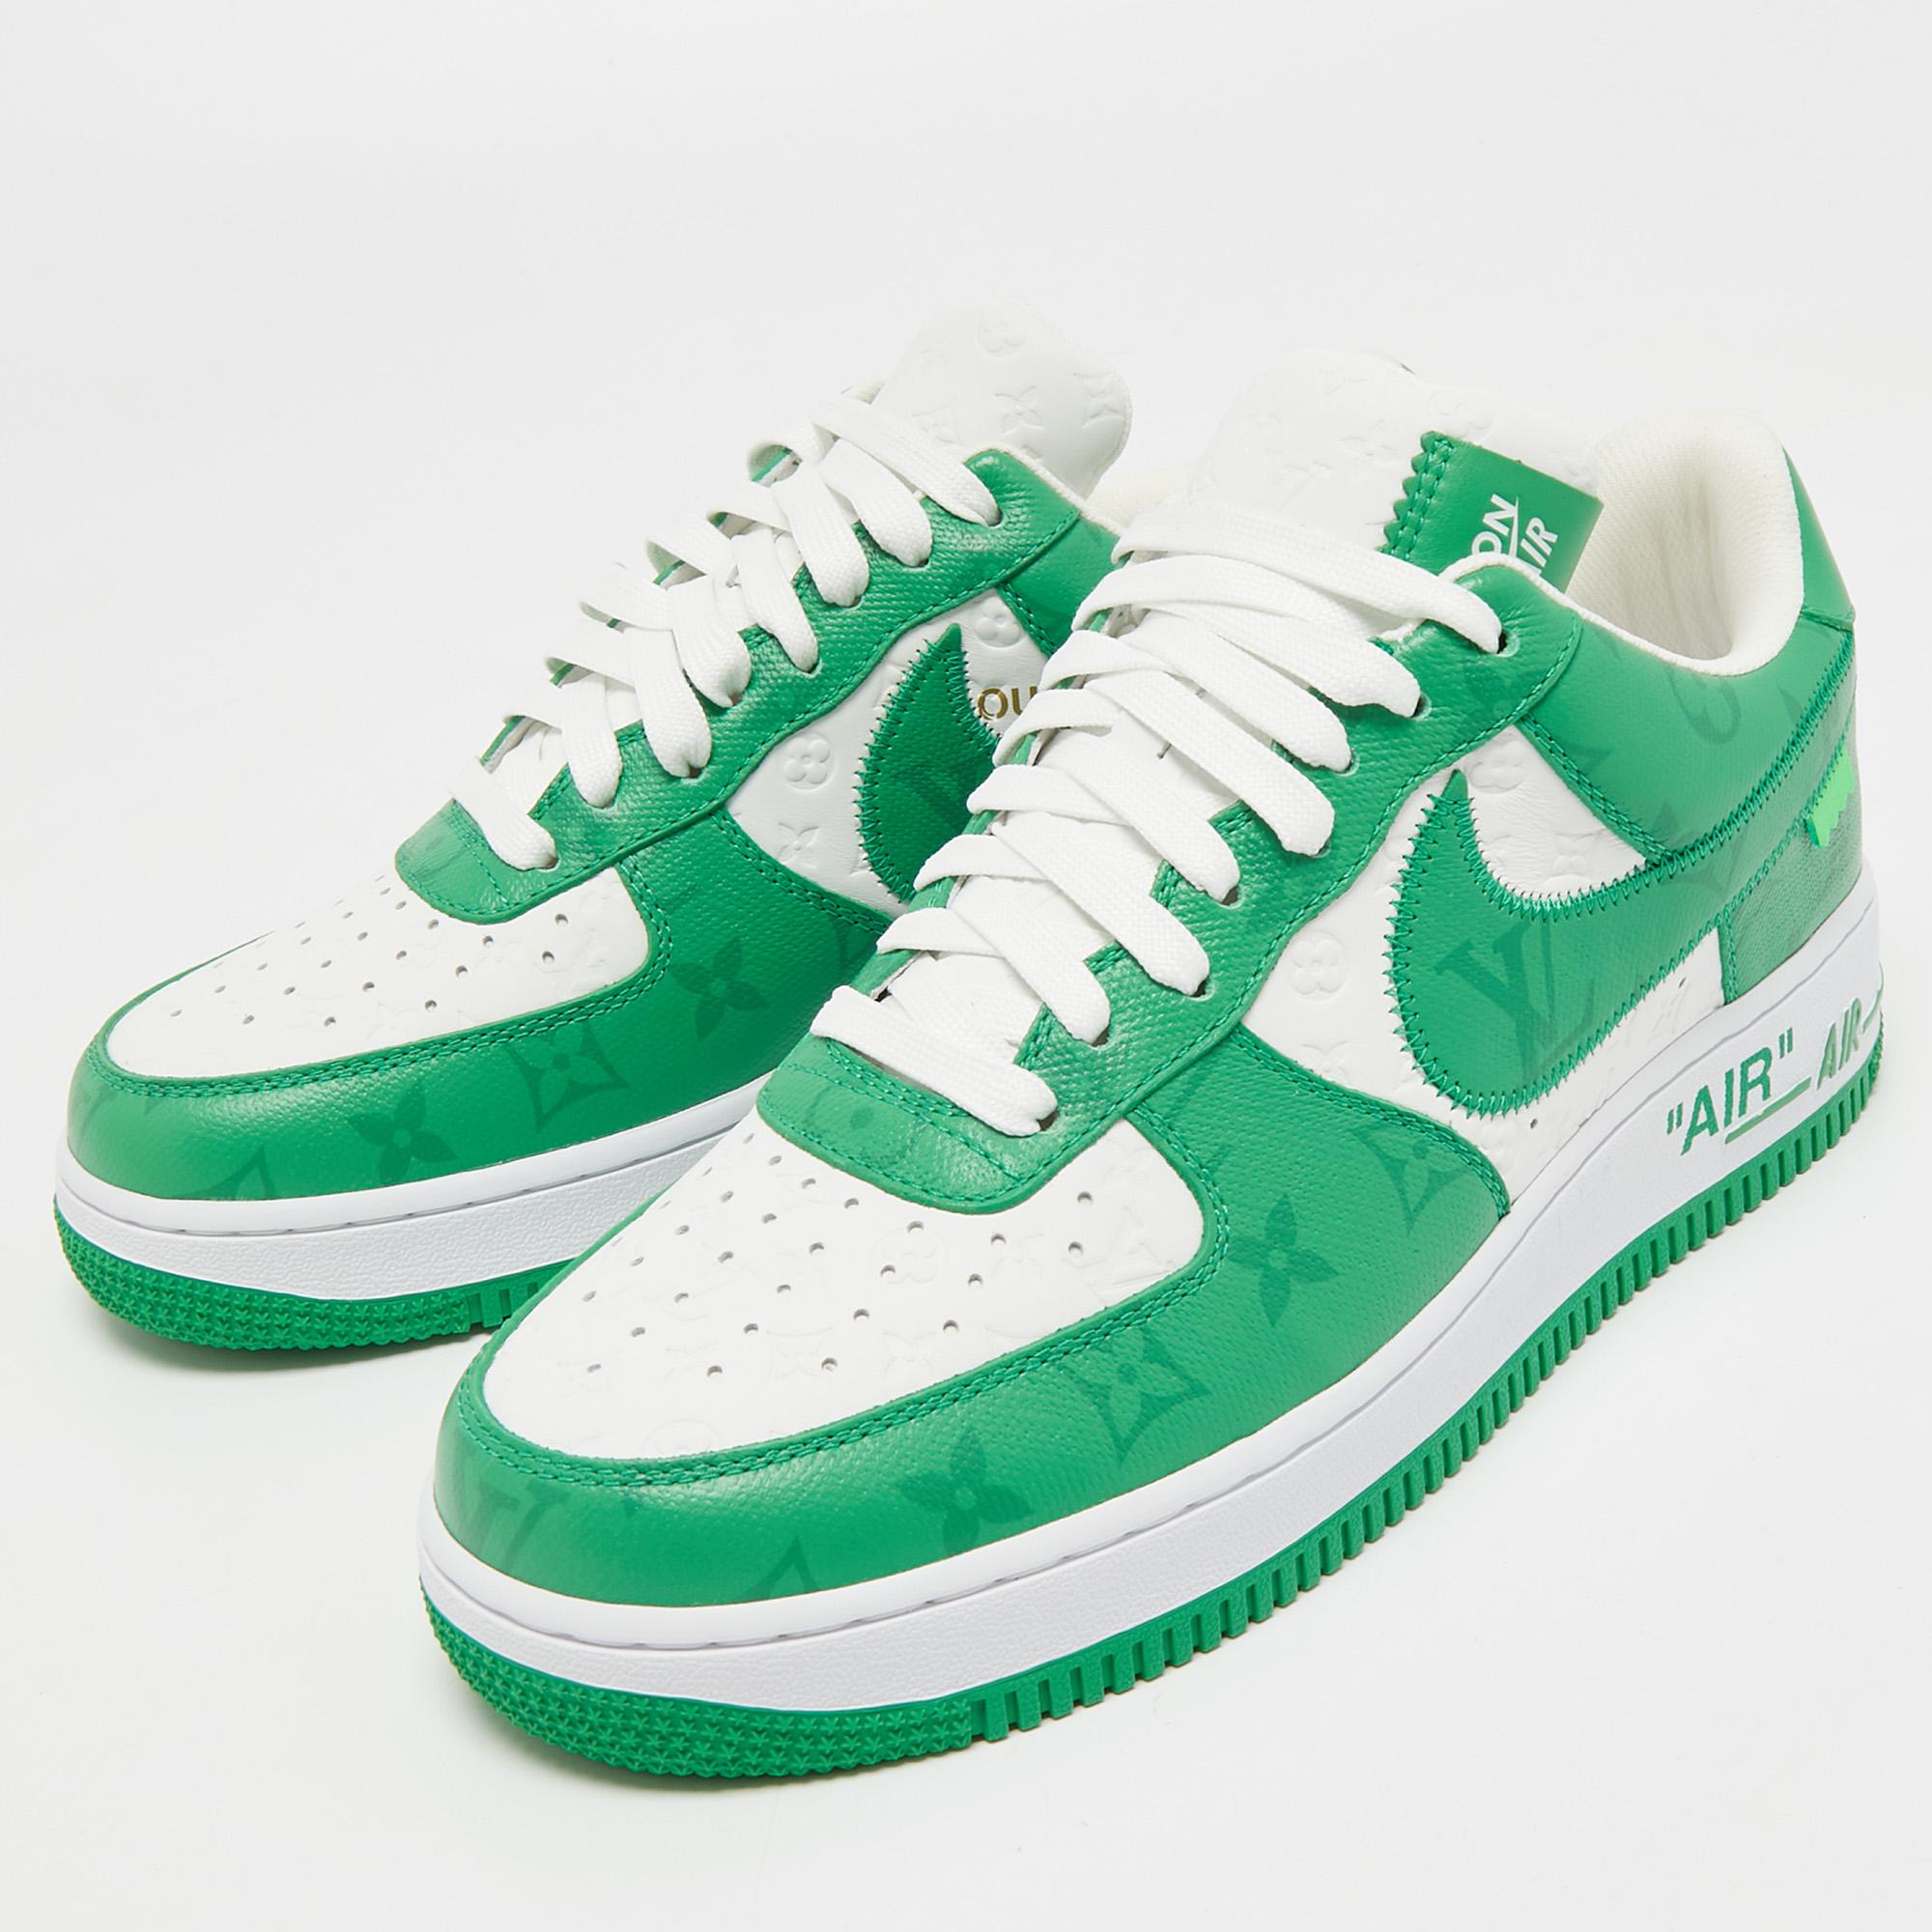 Louis Vuitton x Nike Air Force 1 Low Green Leather Sneakers Size 41 3